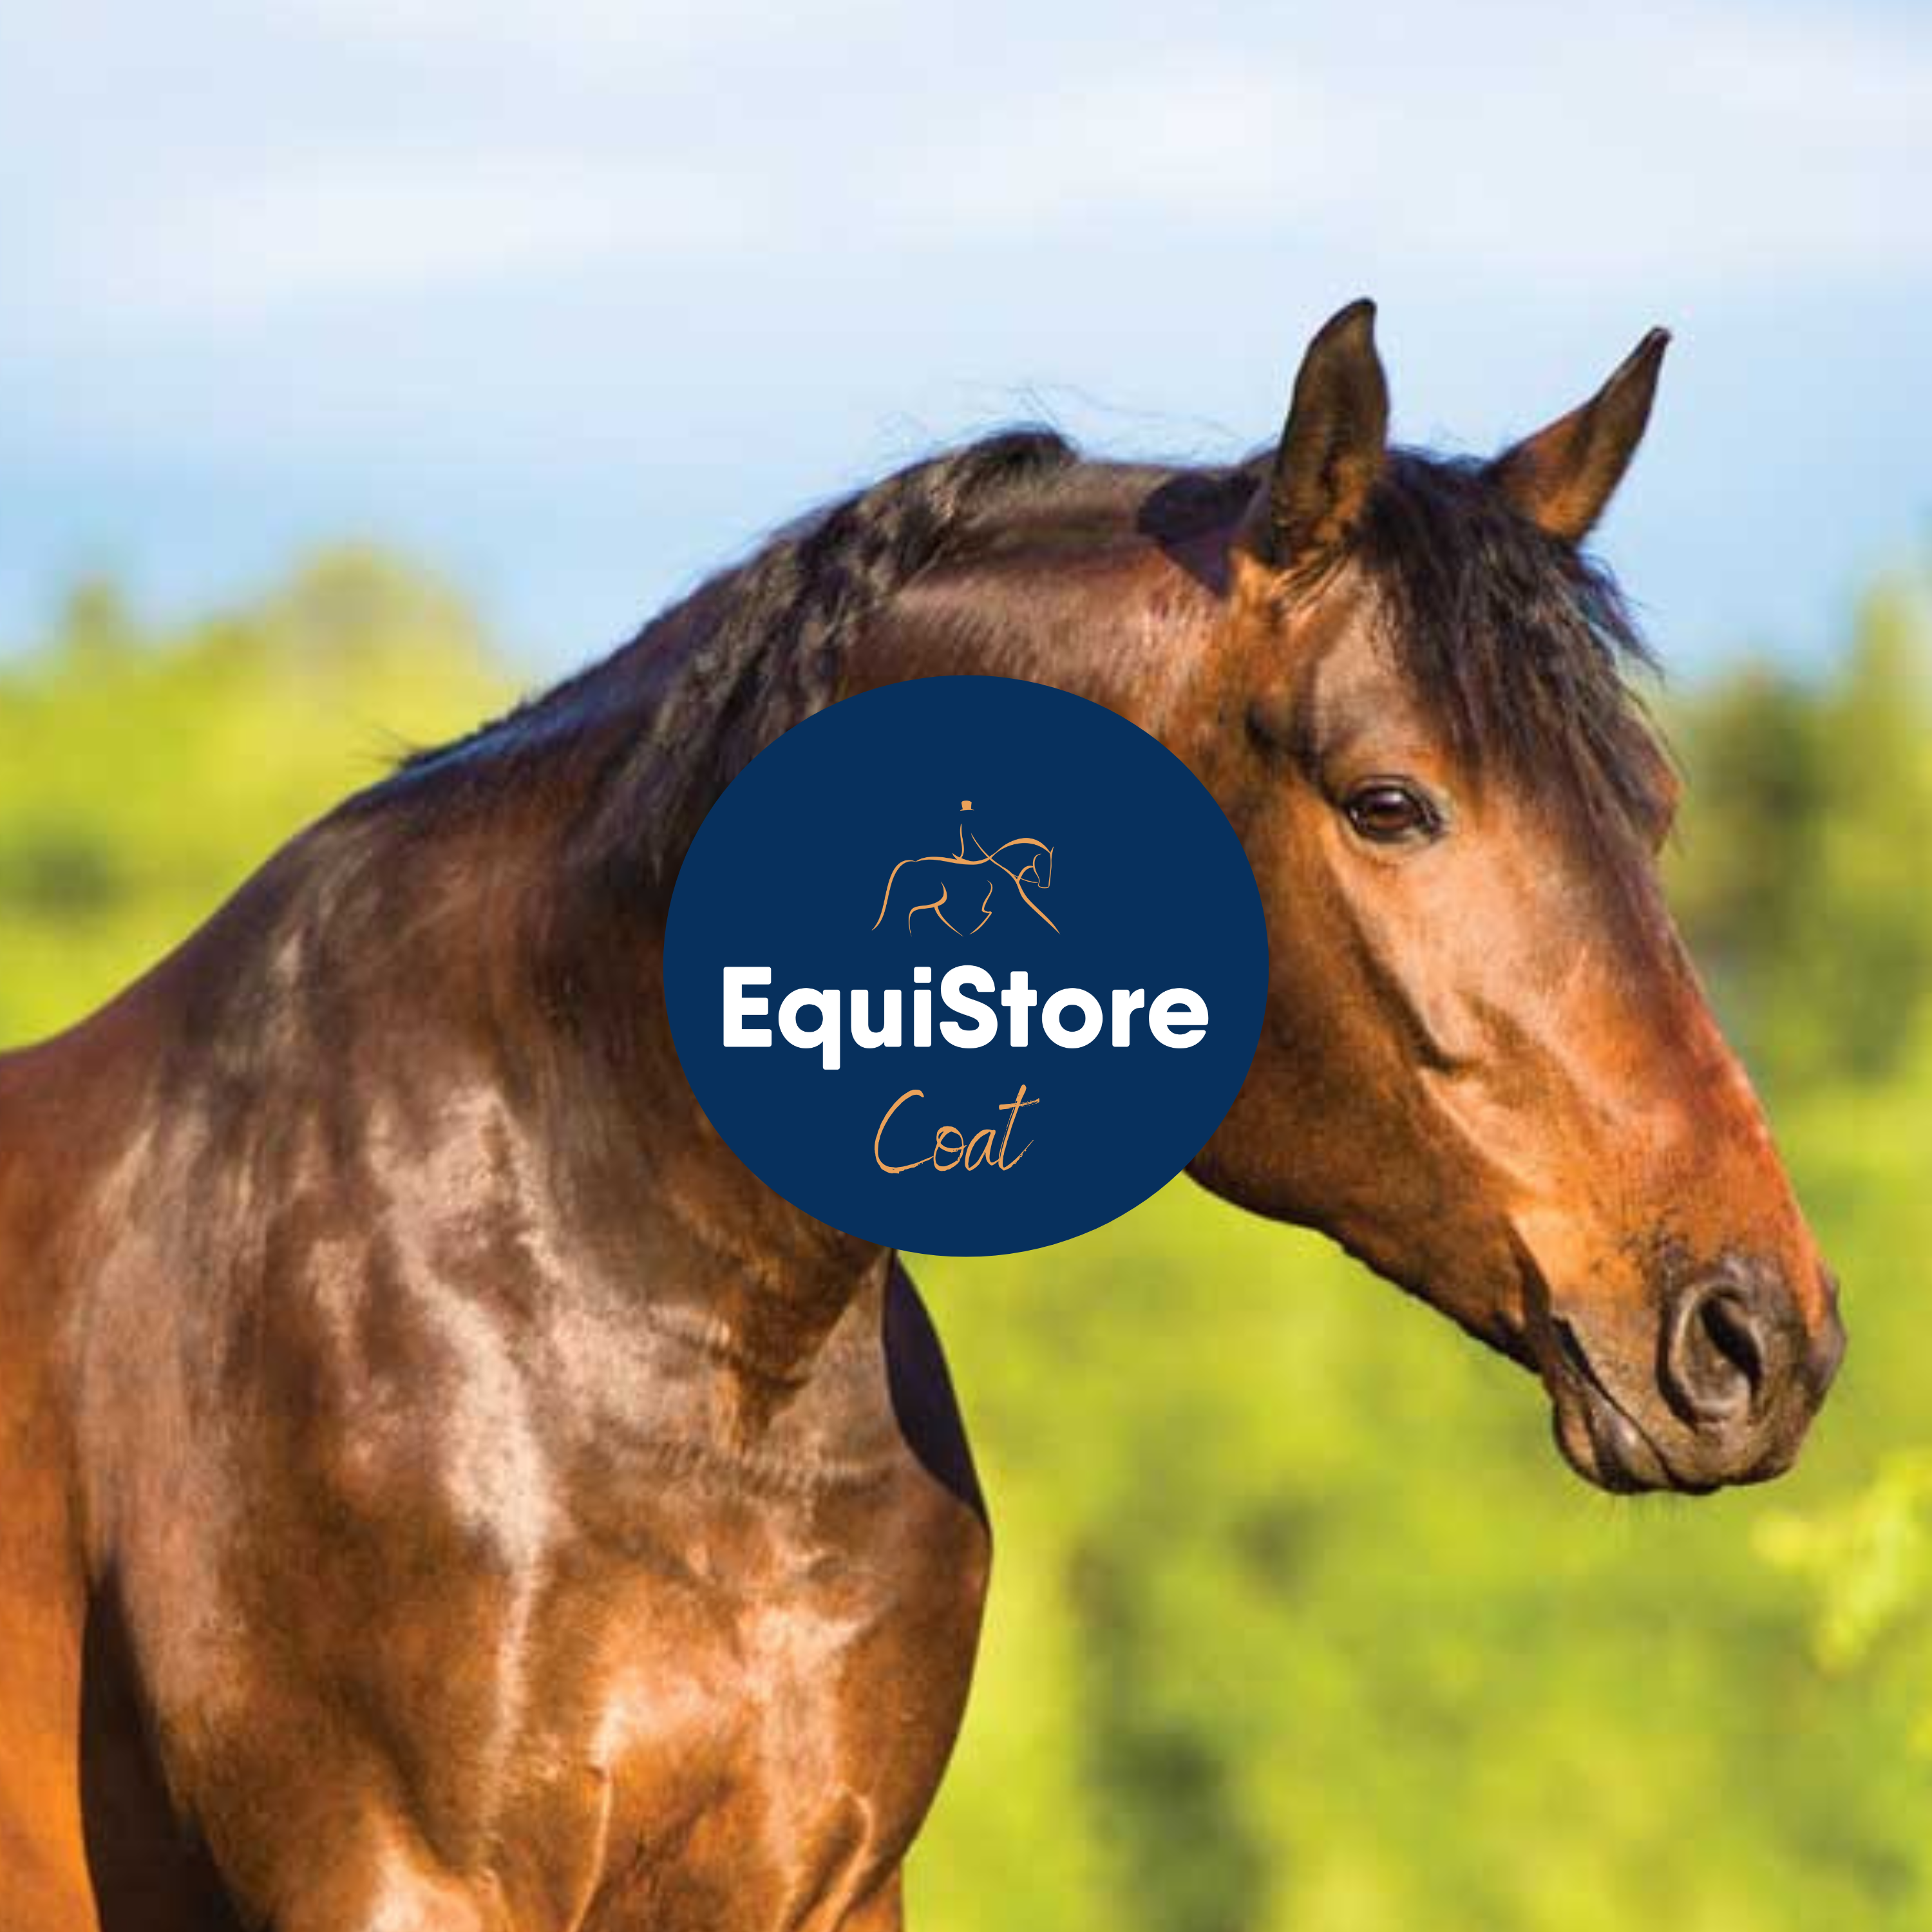 A great range of skin care products and treatments for your horse, to ensure optimal skin and coat condition. Available in Ireland from Equistore.  